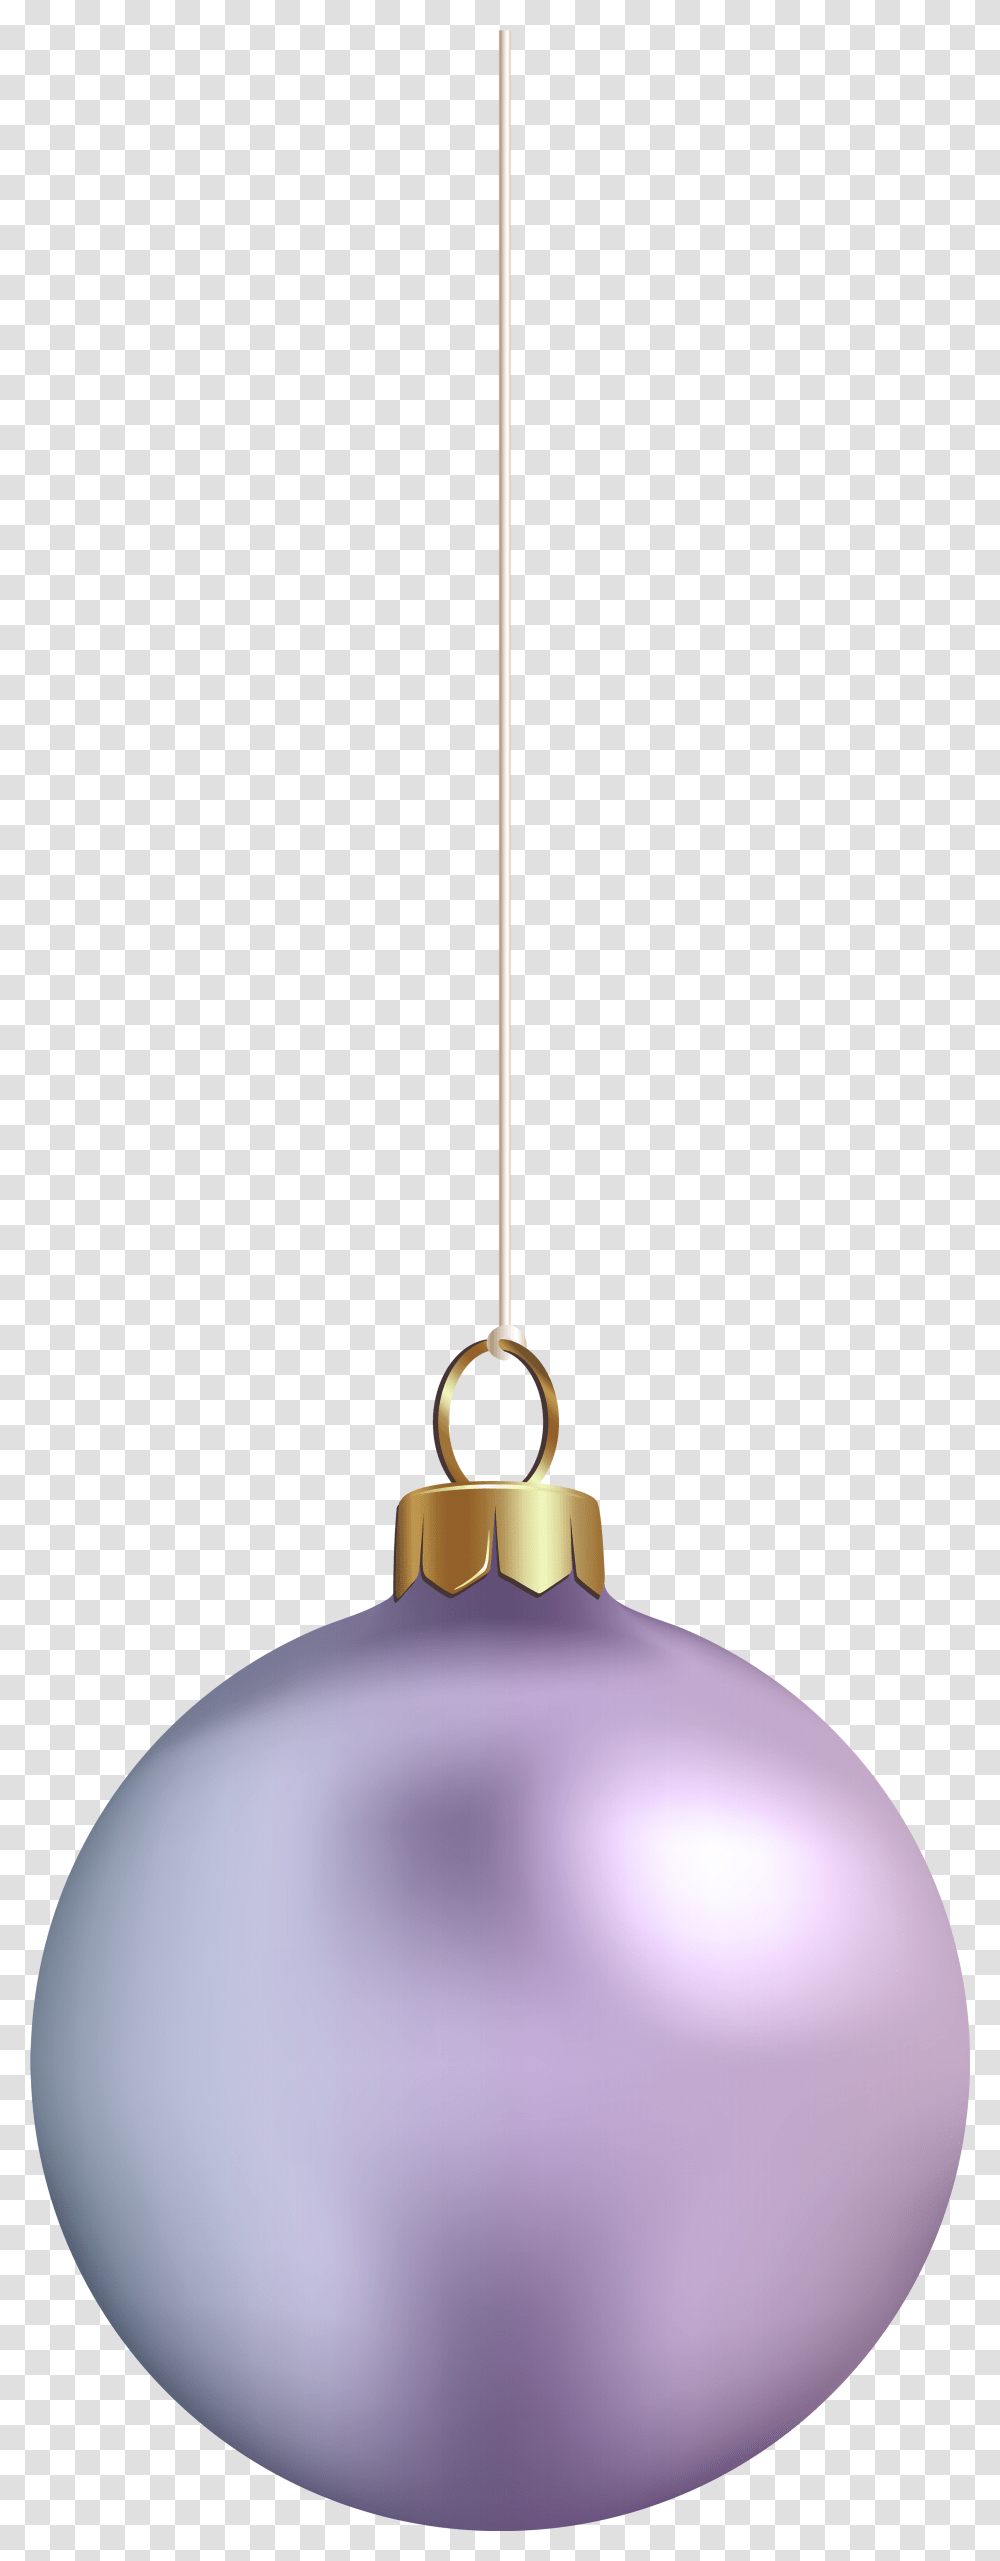 Smiley Silence Download Christmas Ornament, Lamp, Light Fixture, Lighting, Lampshade Transparent Png